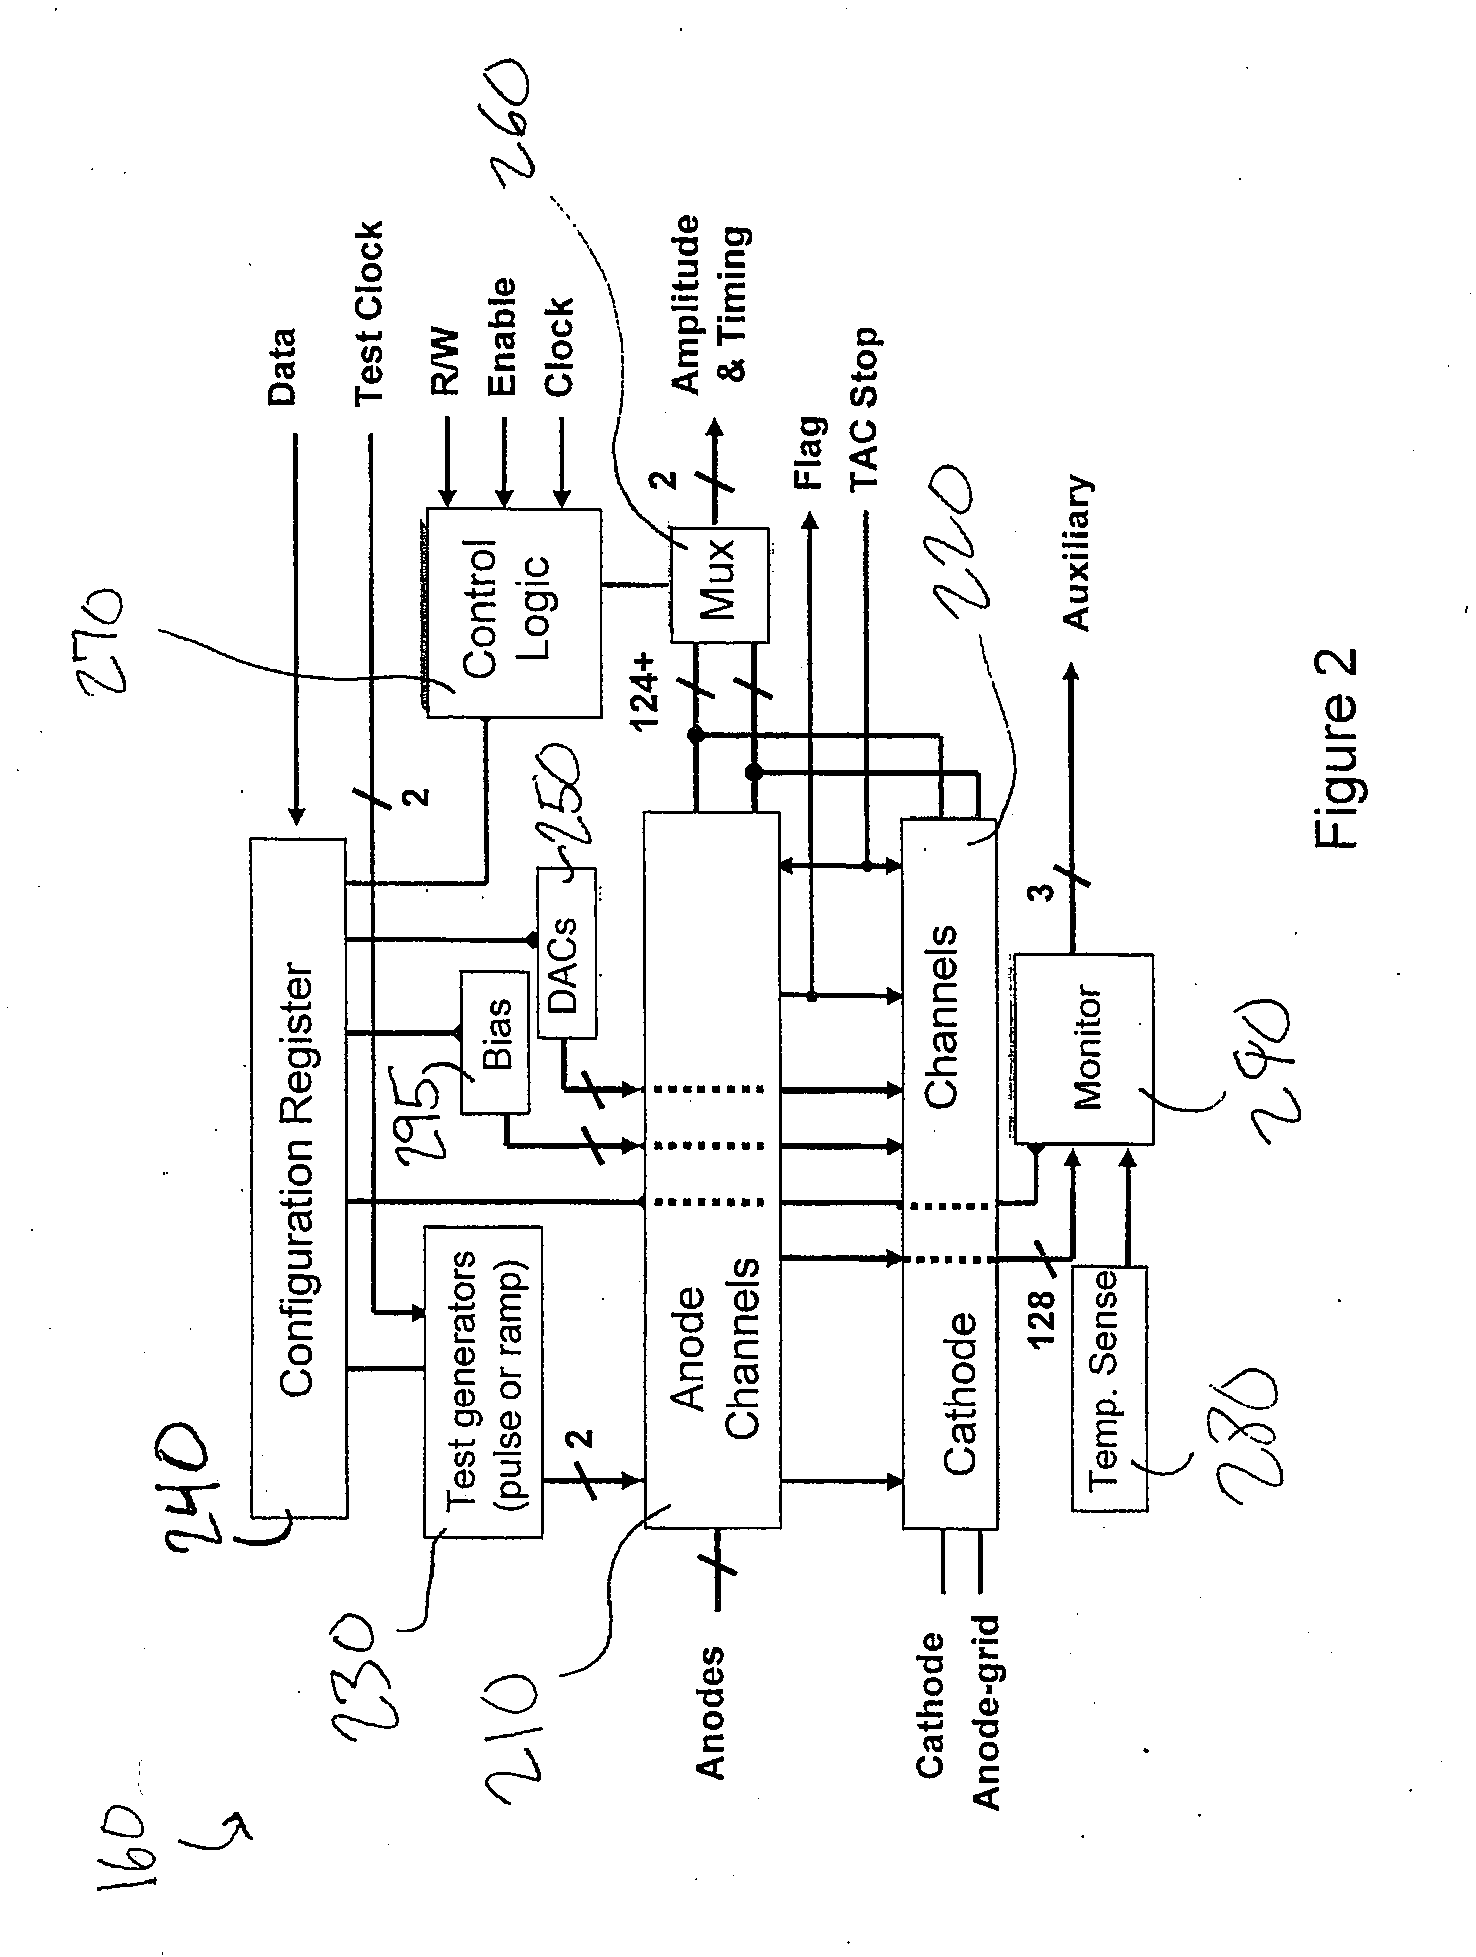 Method and Apparatus for the Measurement of Signals from Radiation Sensors